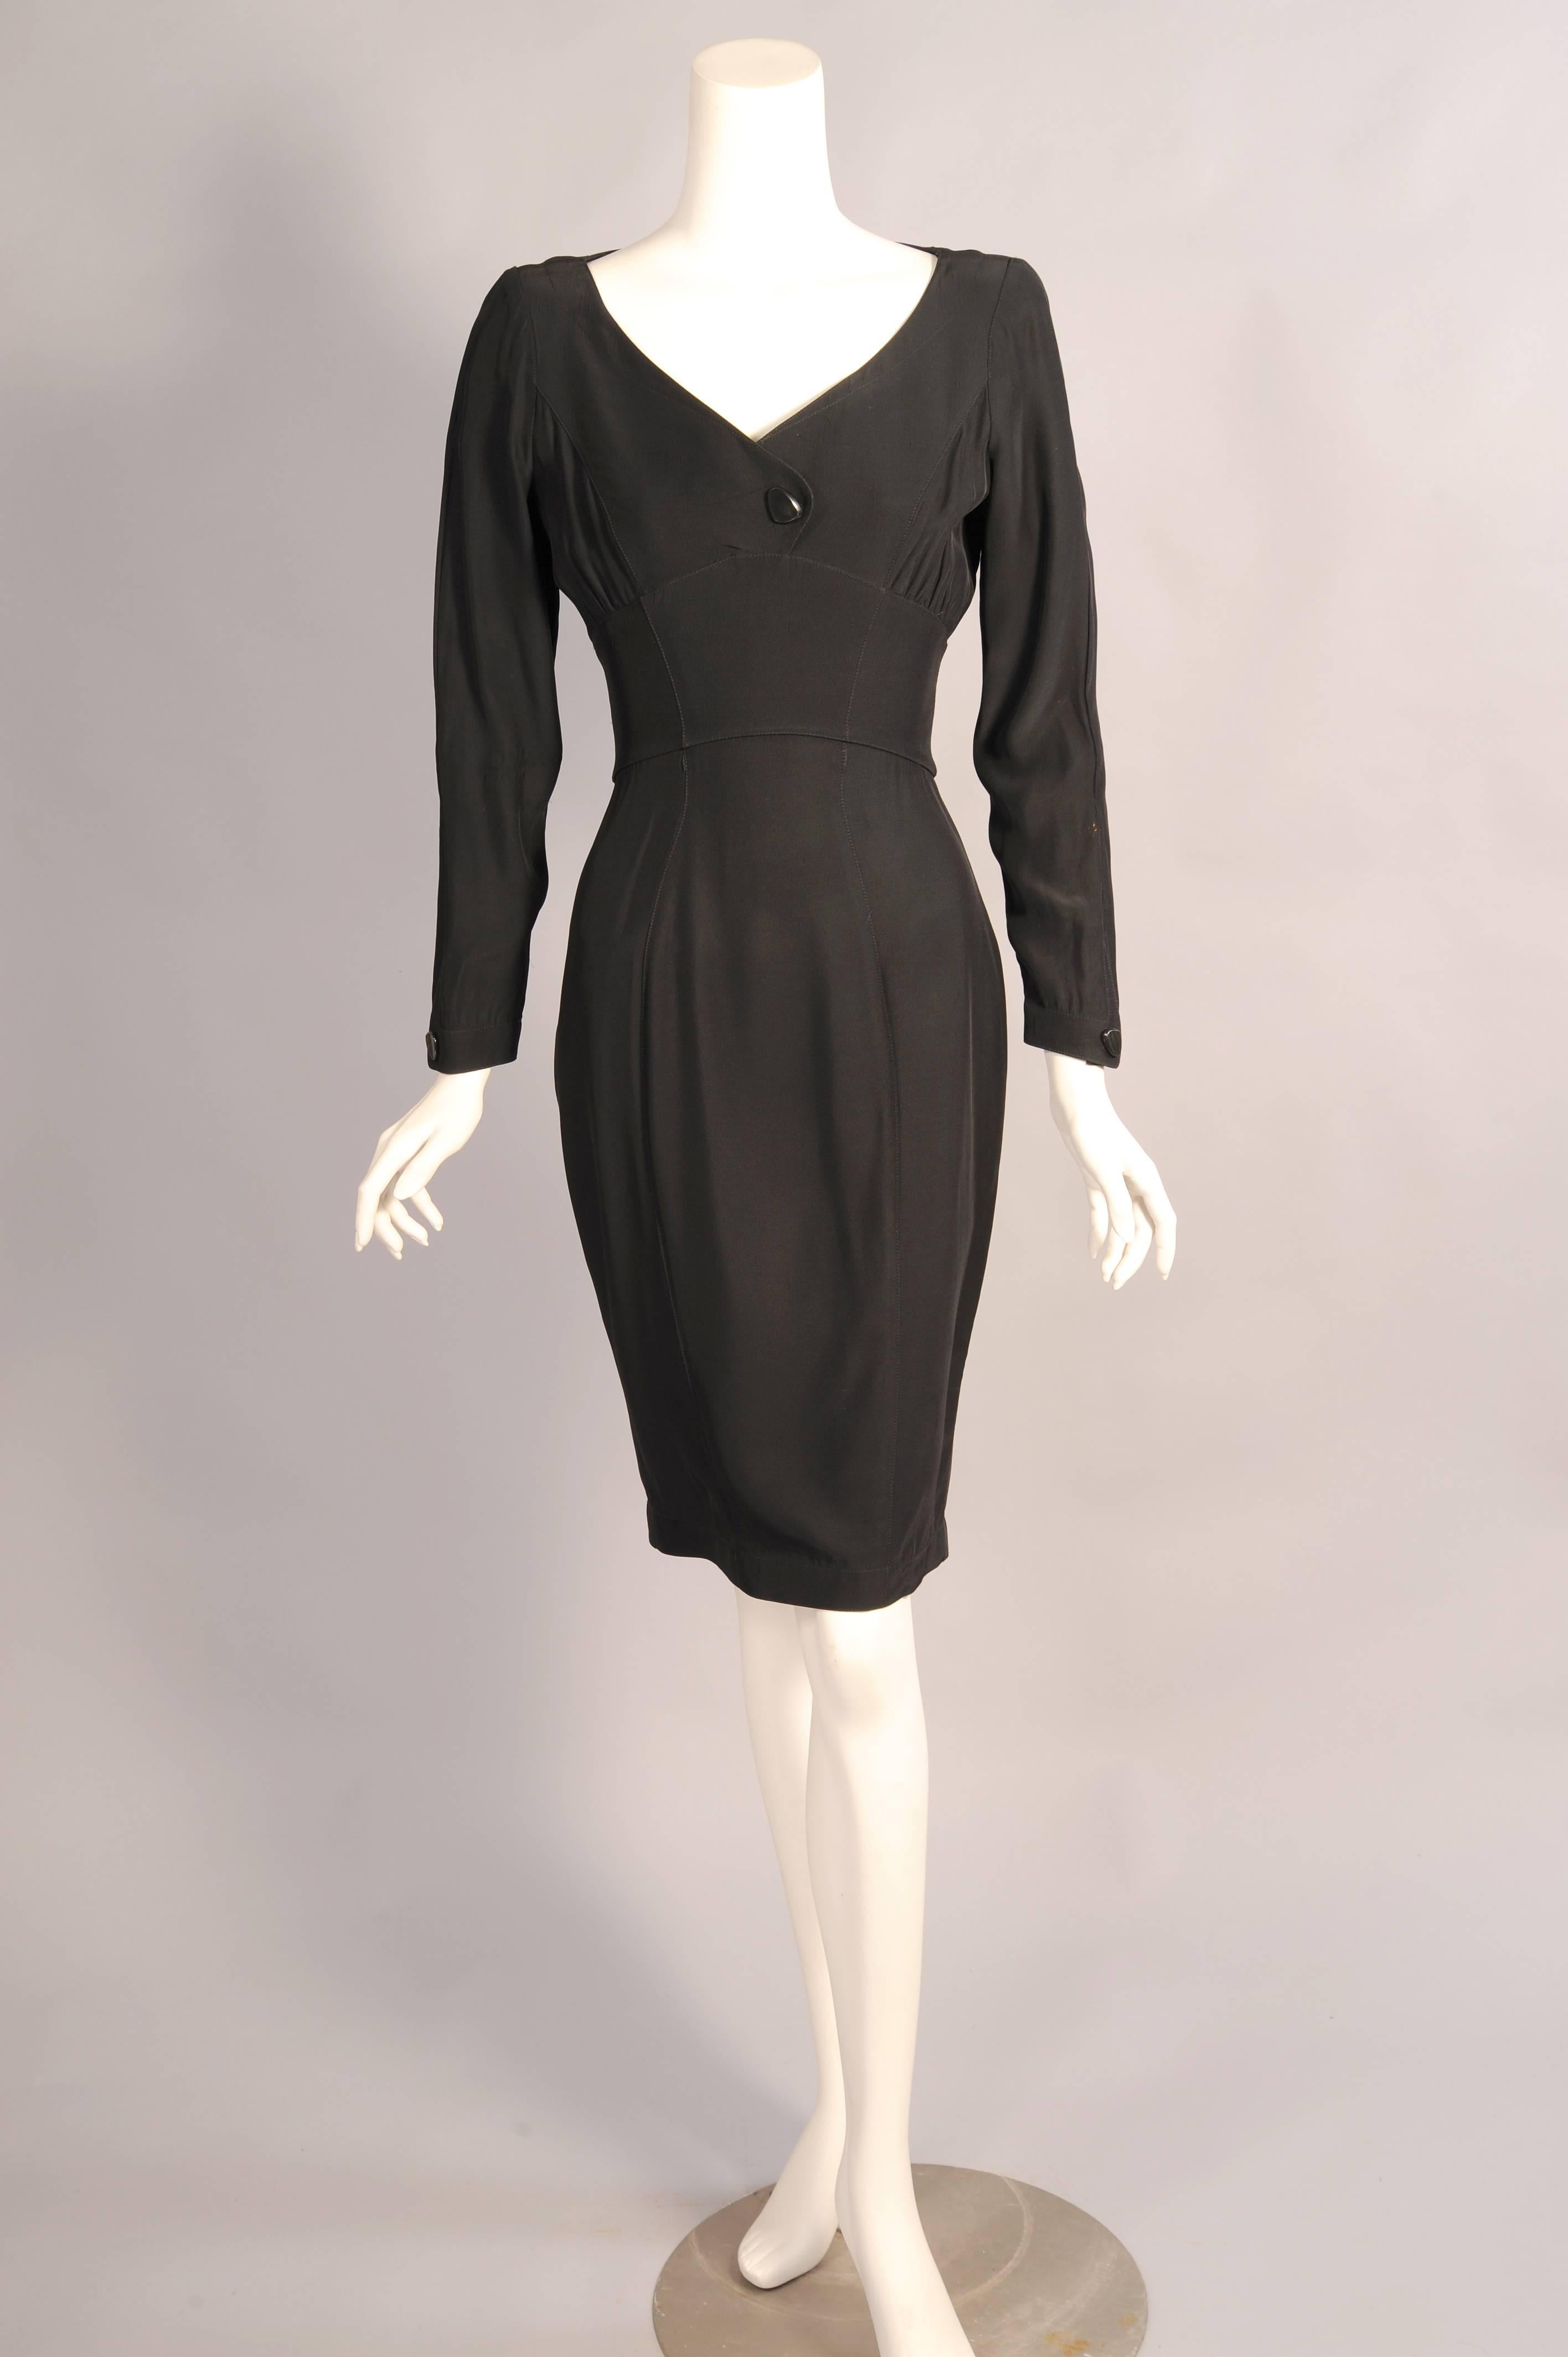 A satin backed crepe is used for this scoop neck, Empire waist dress. Decorative contemporary buttons conceal snaps at the bust, wrist, and all the way down the back. The dress is in excellent condition.
Measurements;
Shoulders 15.5